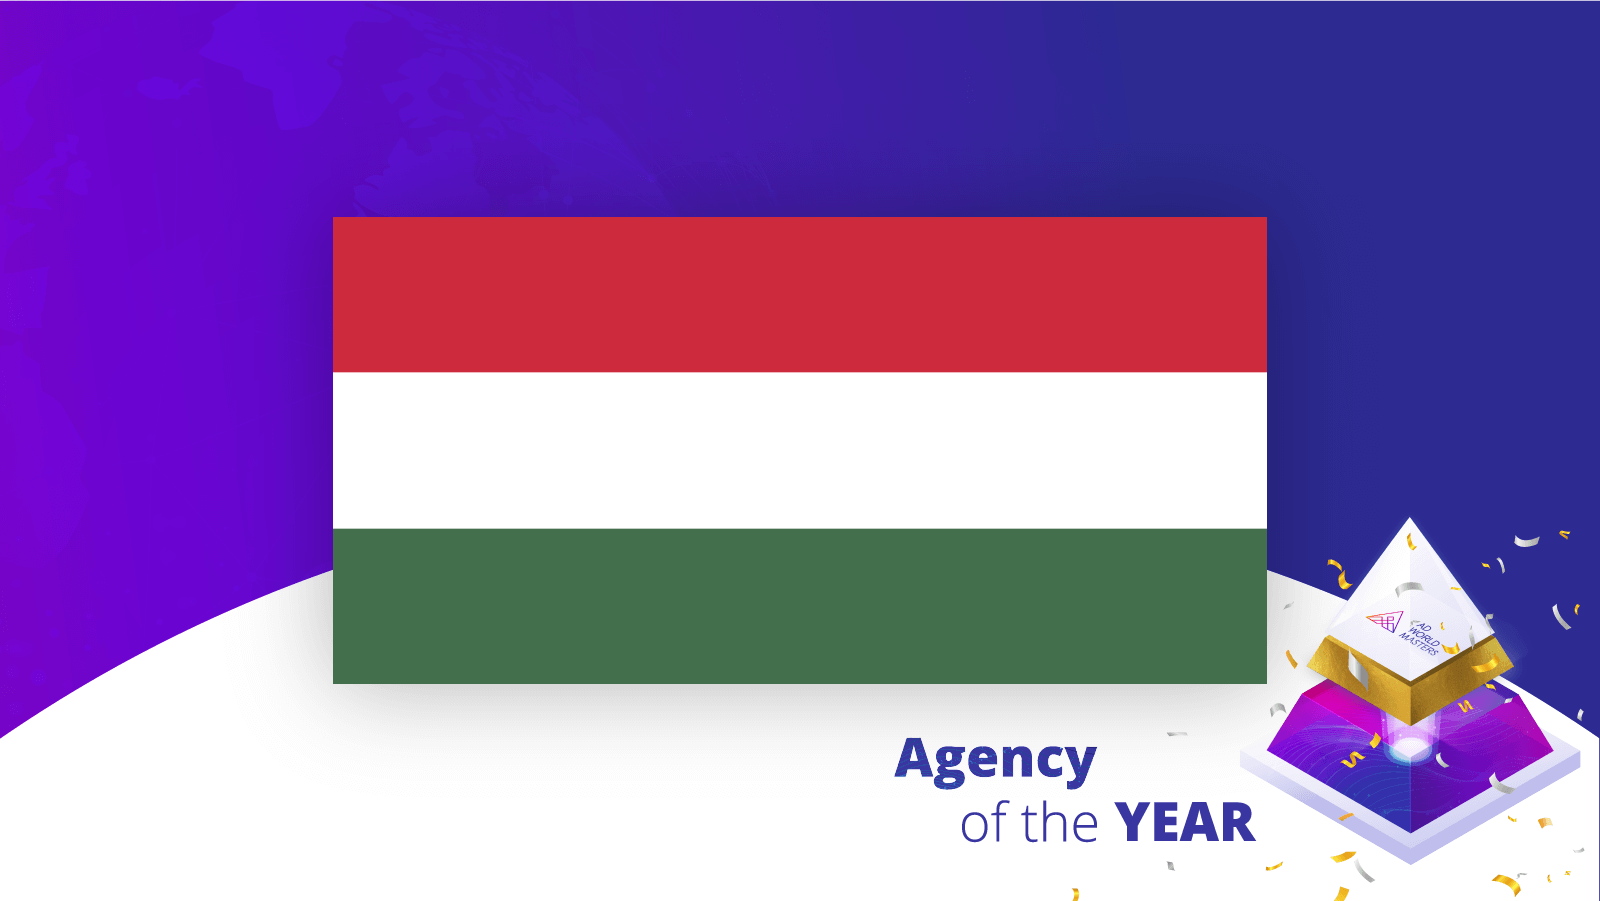 Agencies of the Year Hungary